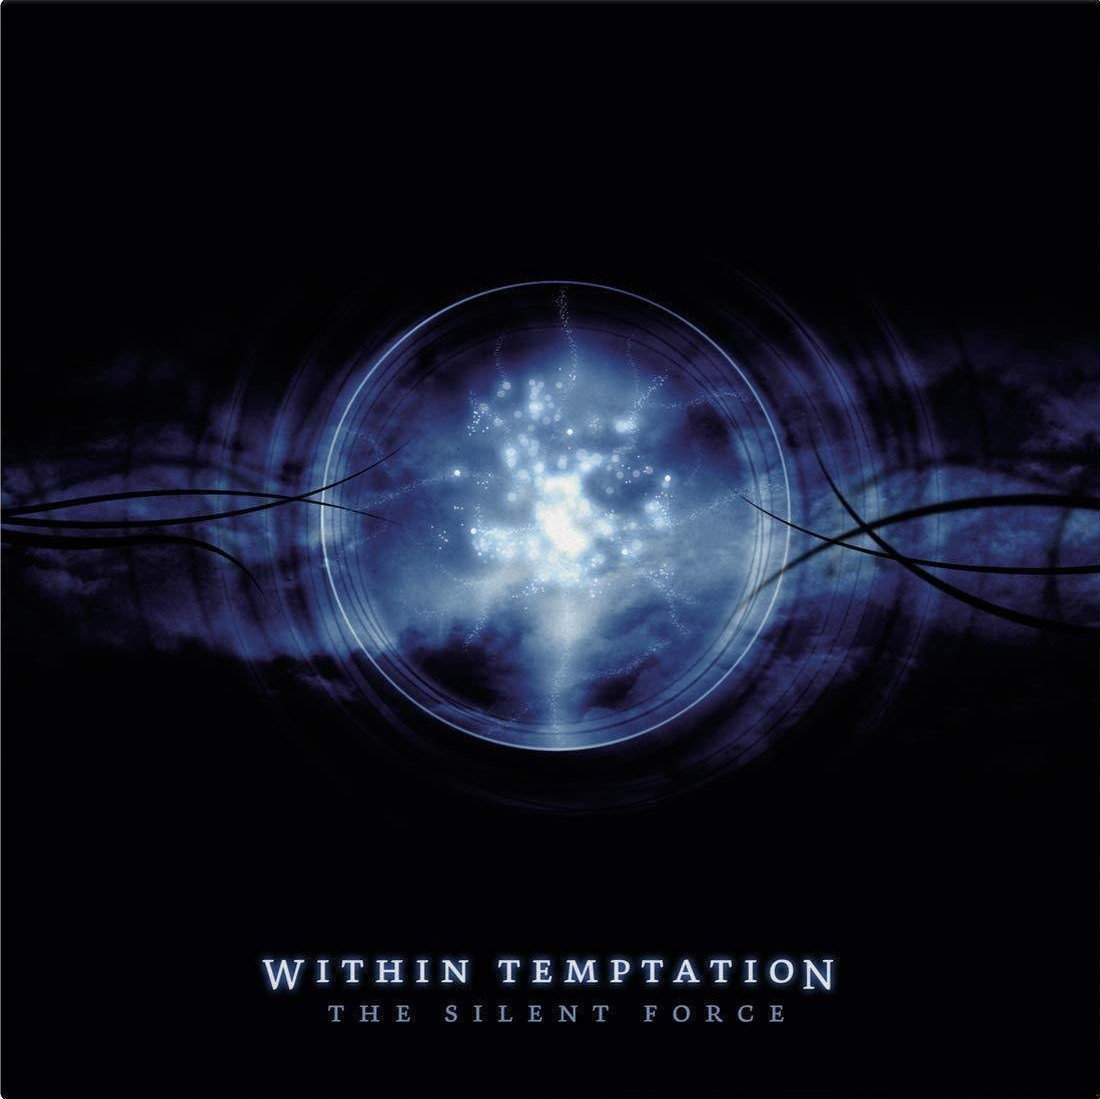 Vinyl Record Within Temptation - Silent Force (Crystal Clear Coloured Vinyl) (LP)